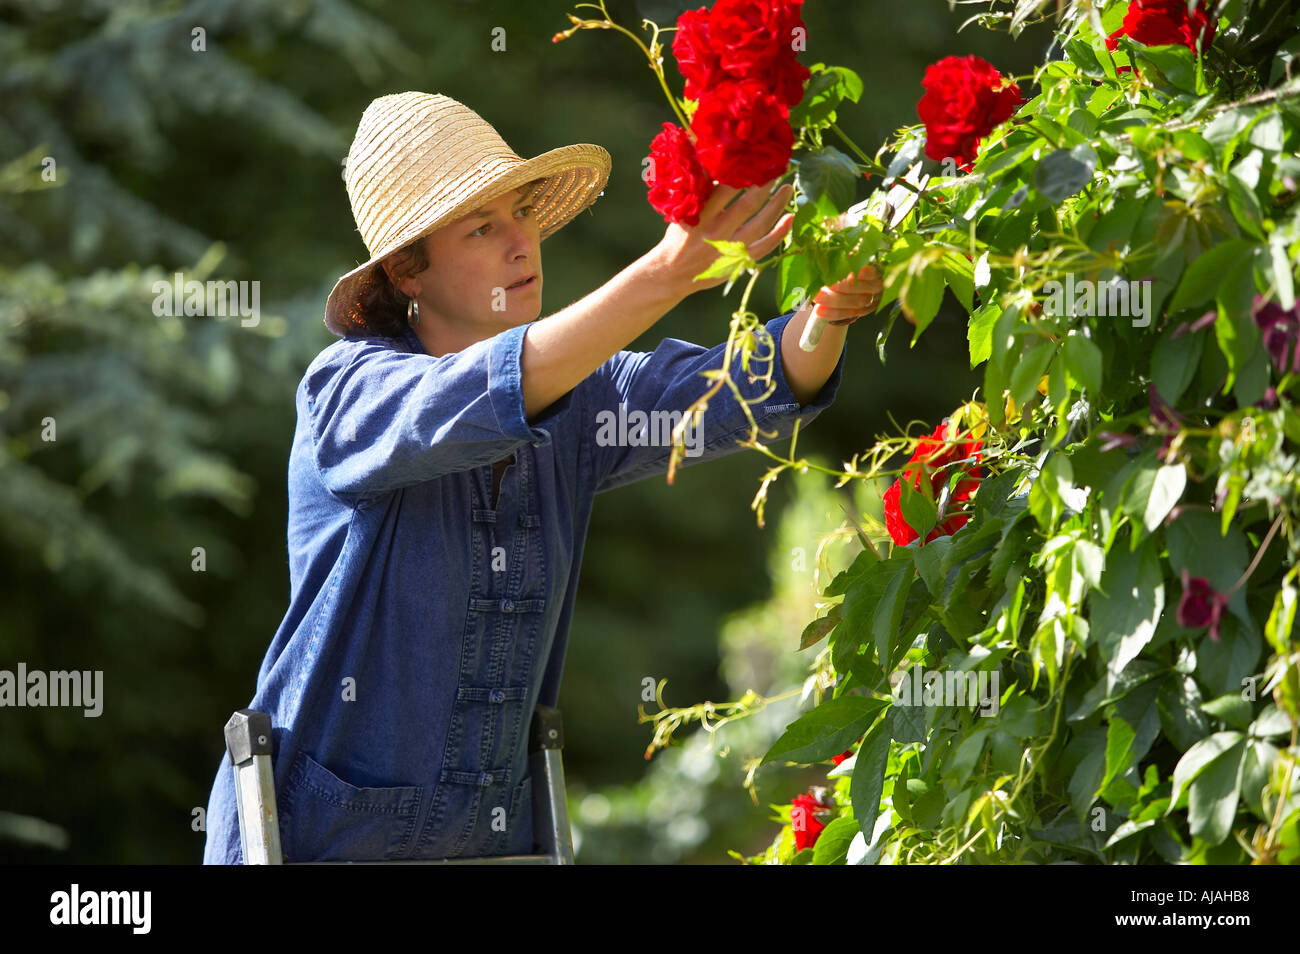 Woman model released pruning roses in a garden Dorset England UK Stock Photo